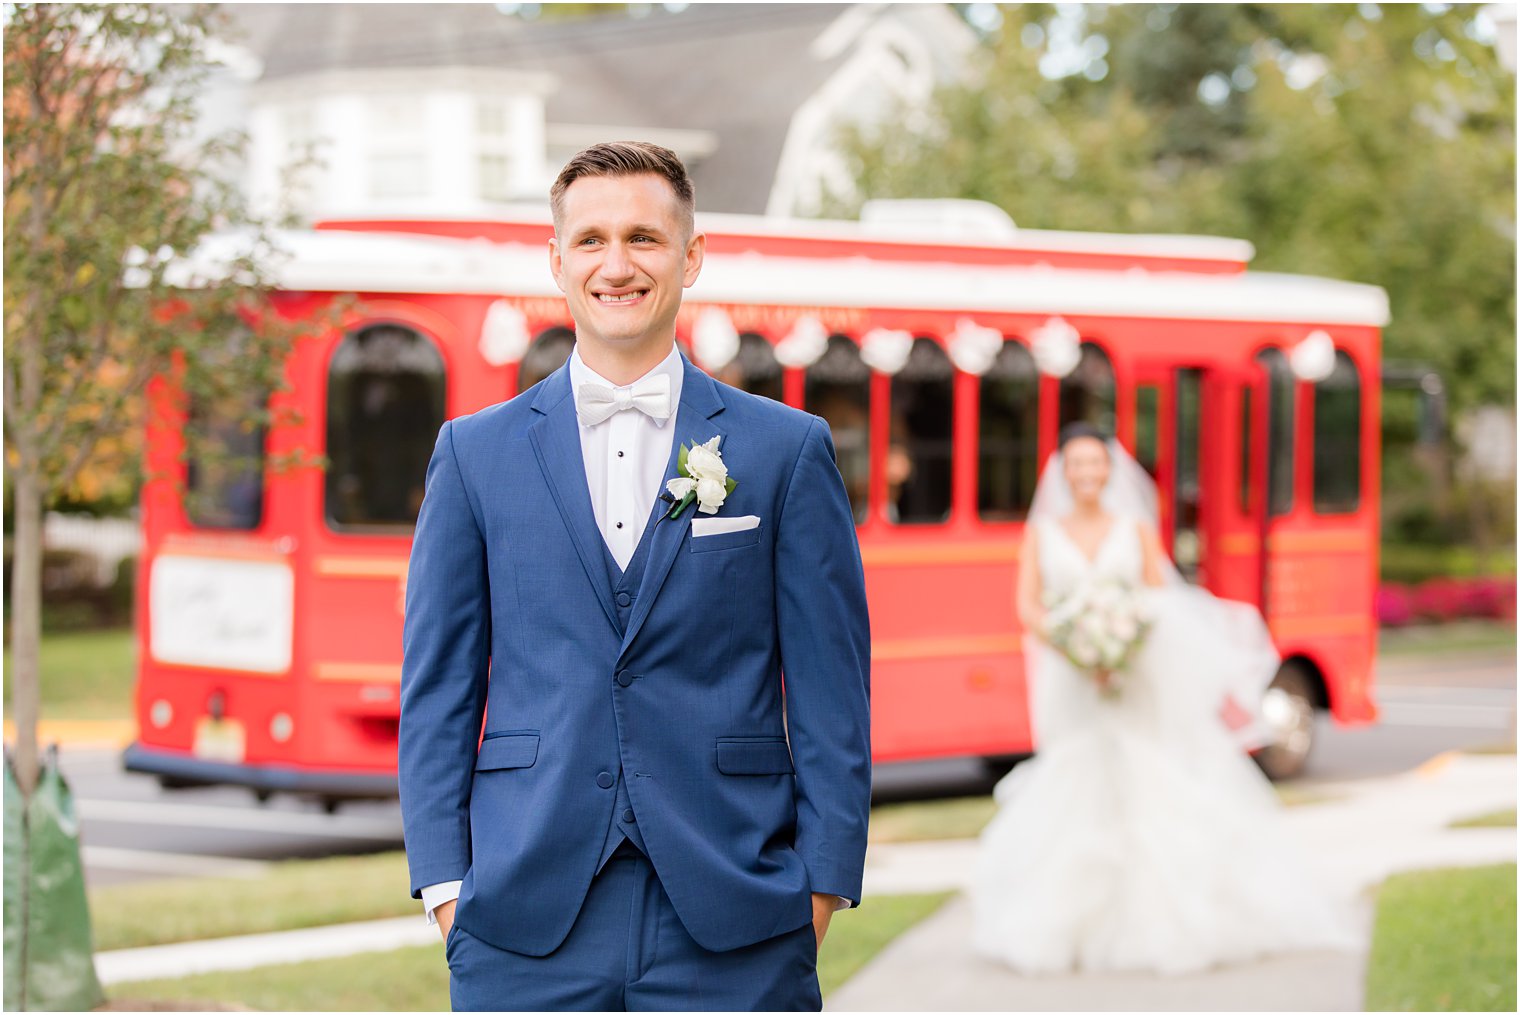 bride approaches groom for first look outside red trolley